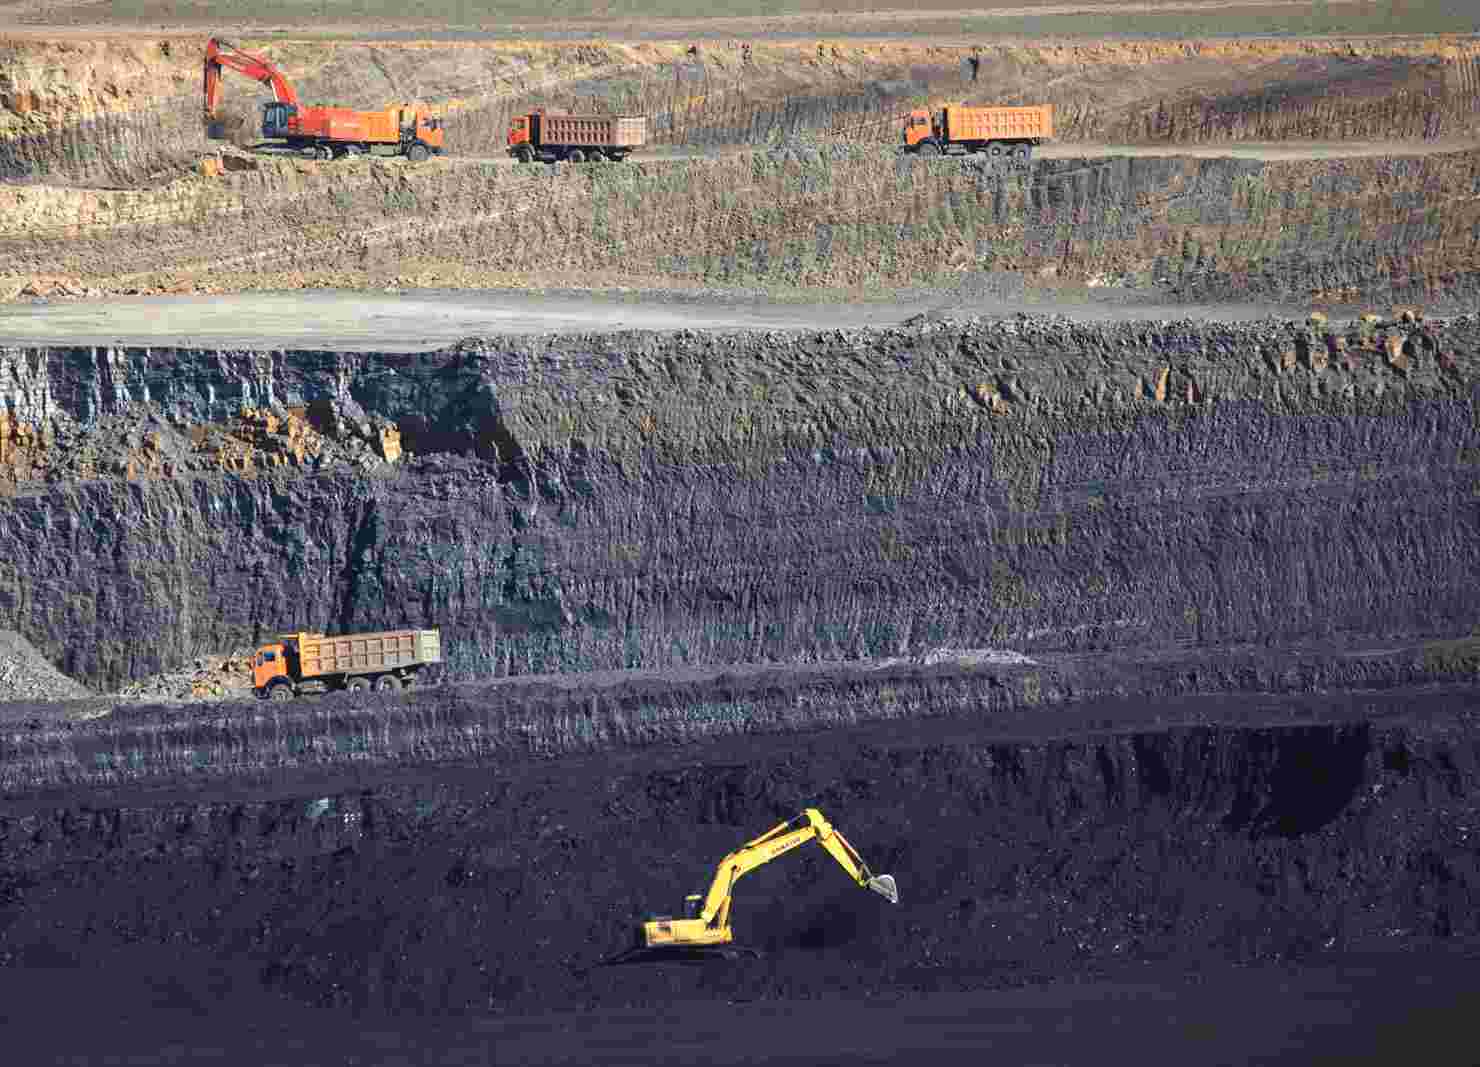 Allotment of one coal mine each to NMDC and RINL,coal mine auctions